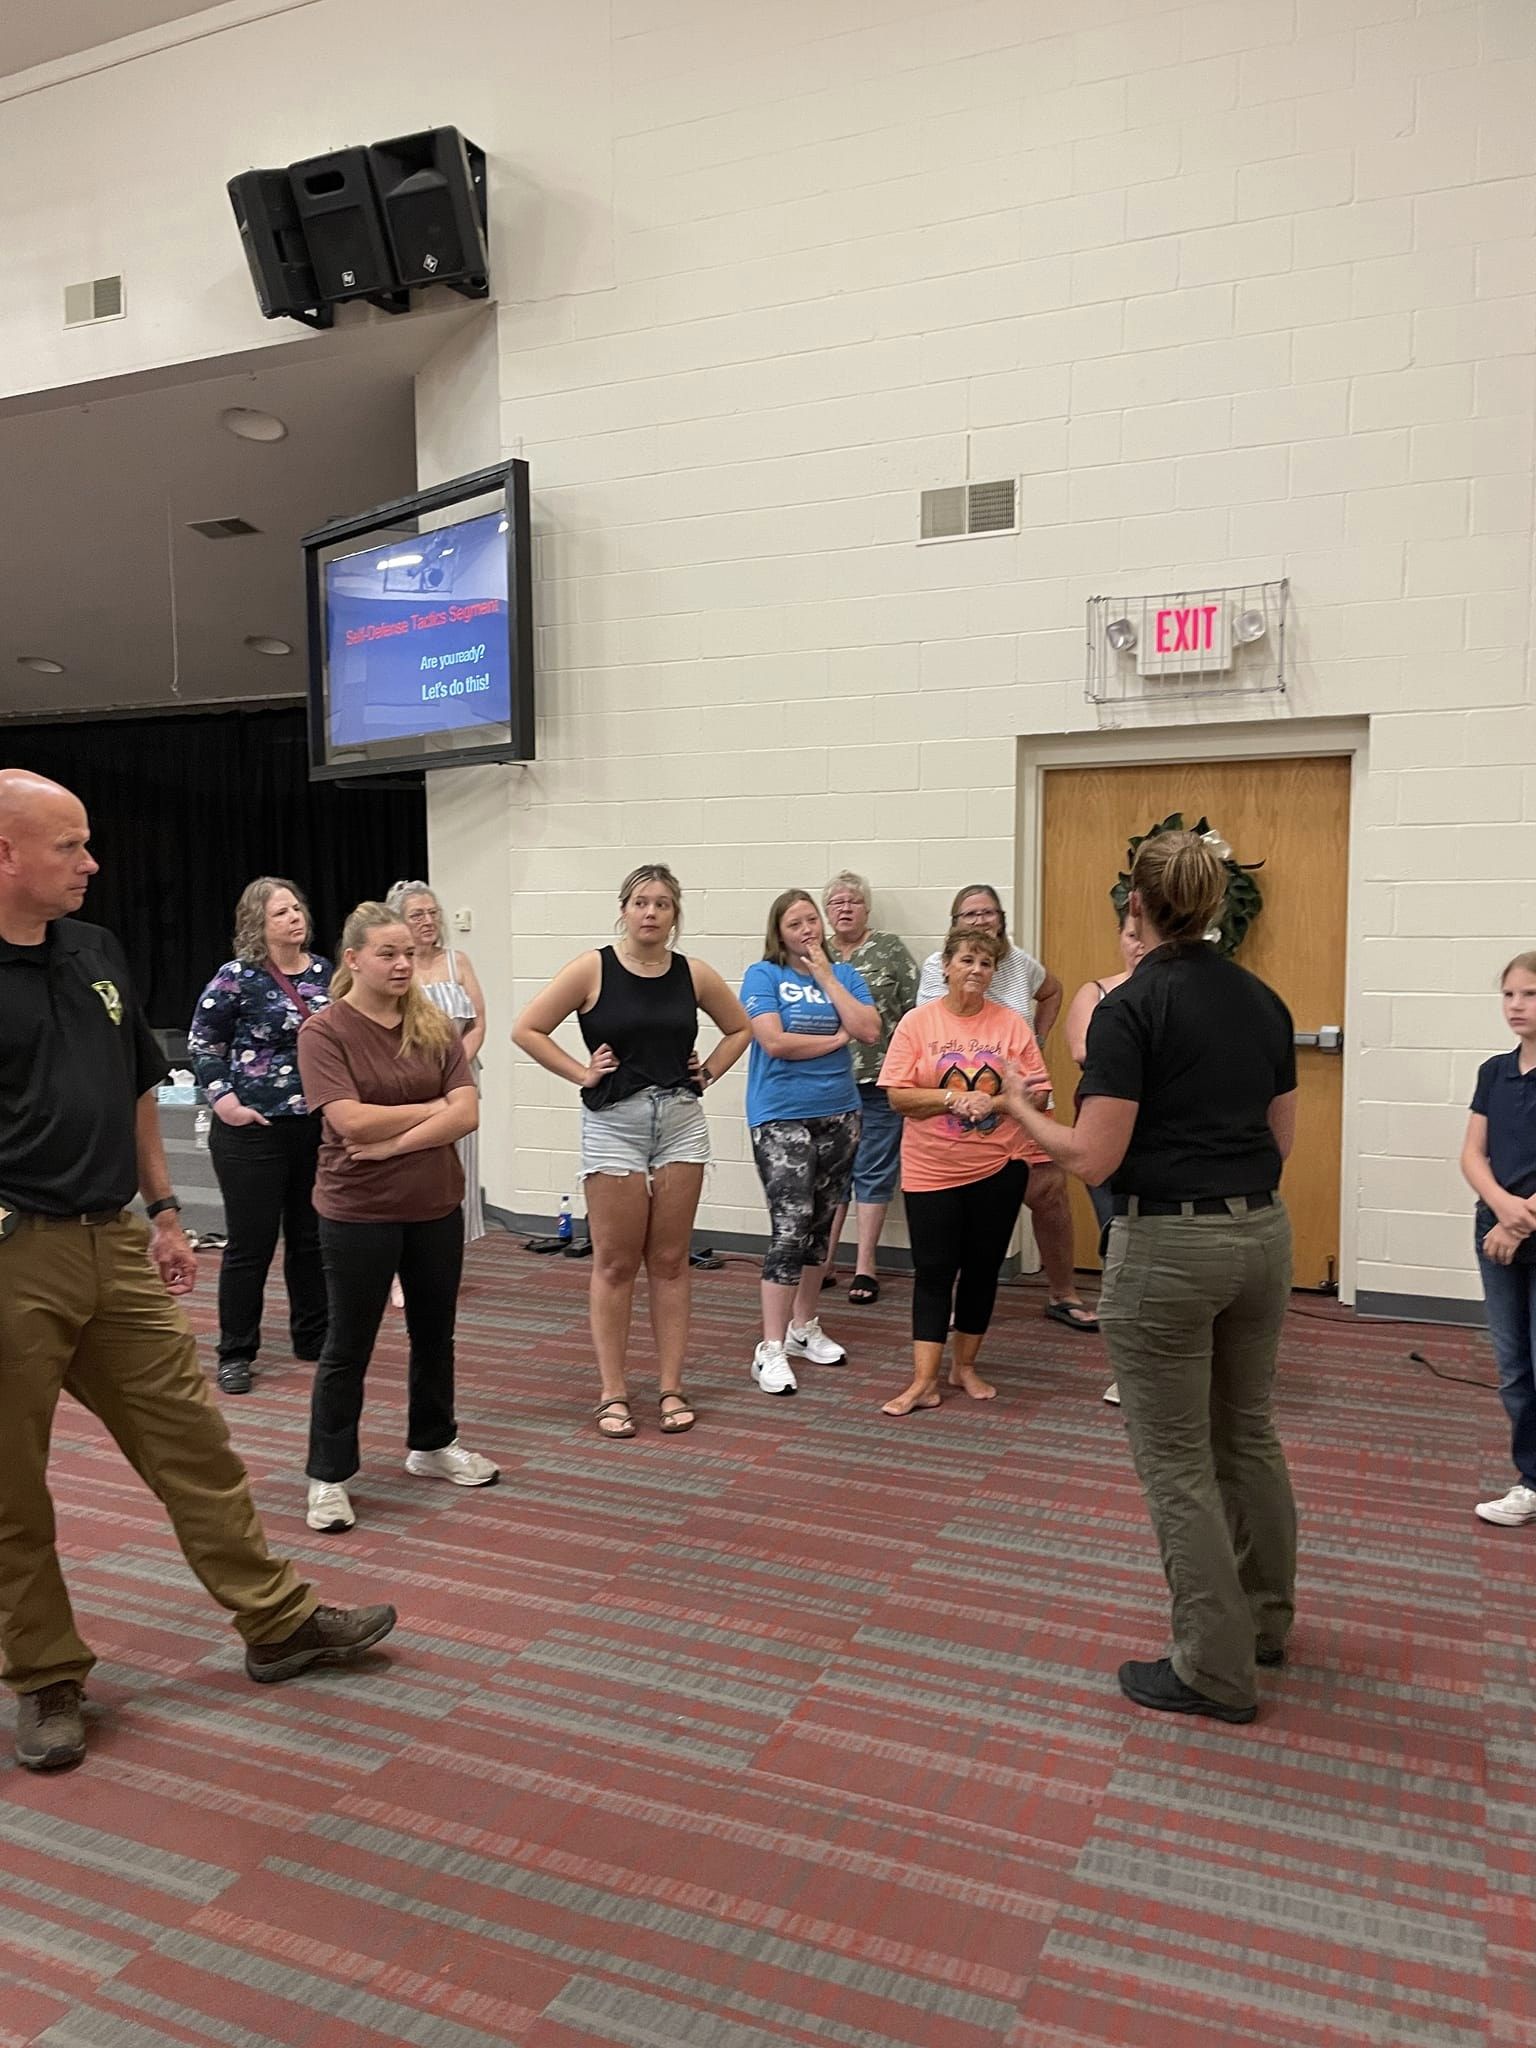 Women's self-defense session emphasizing personal safety.